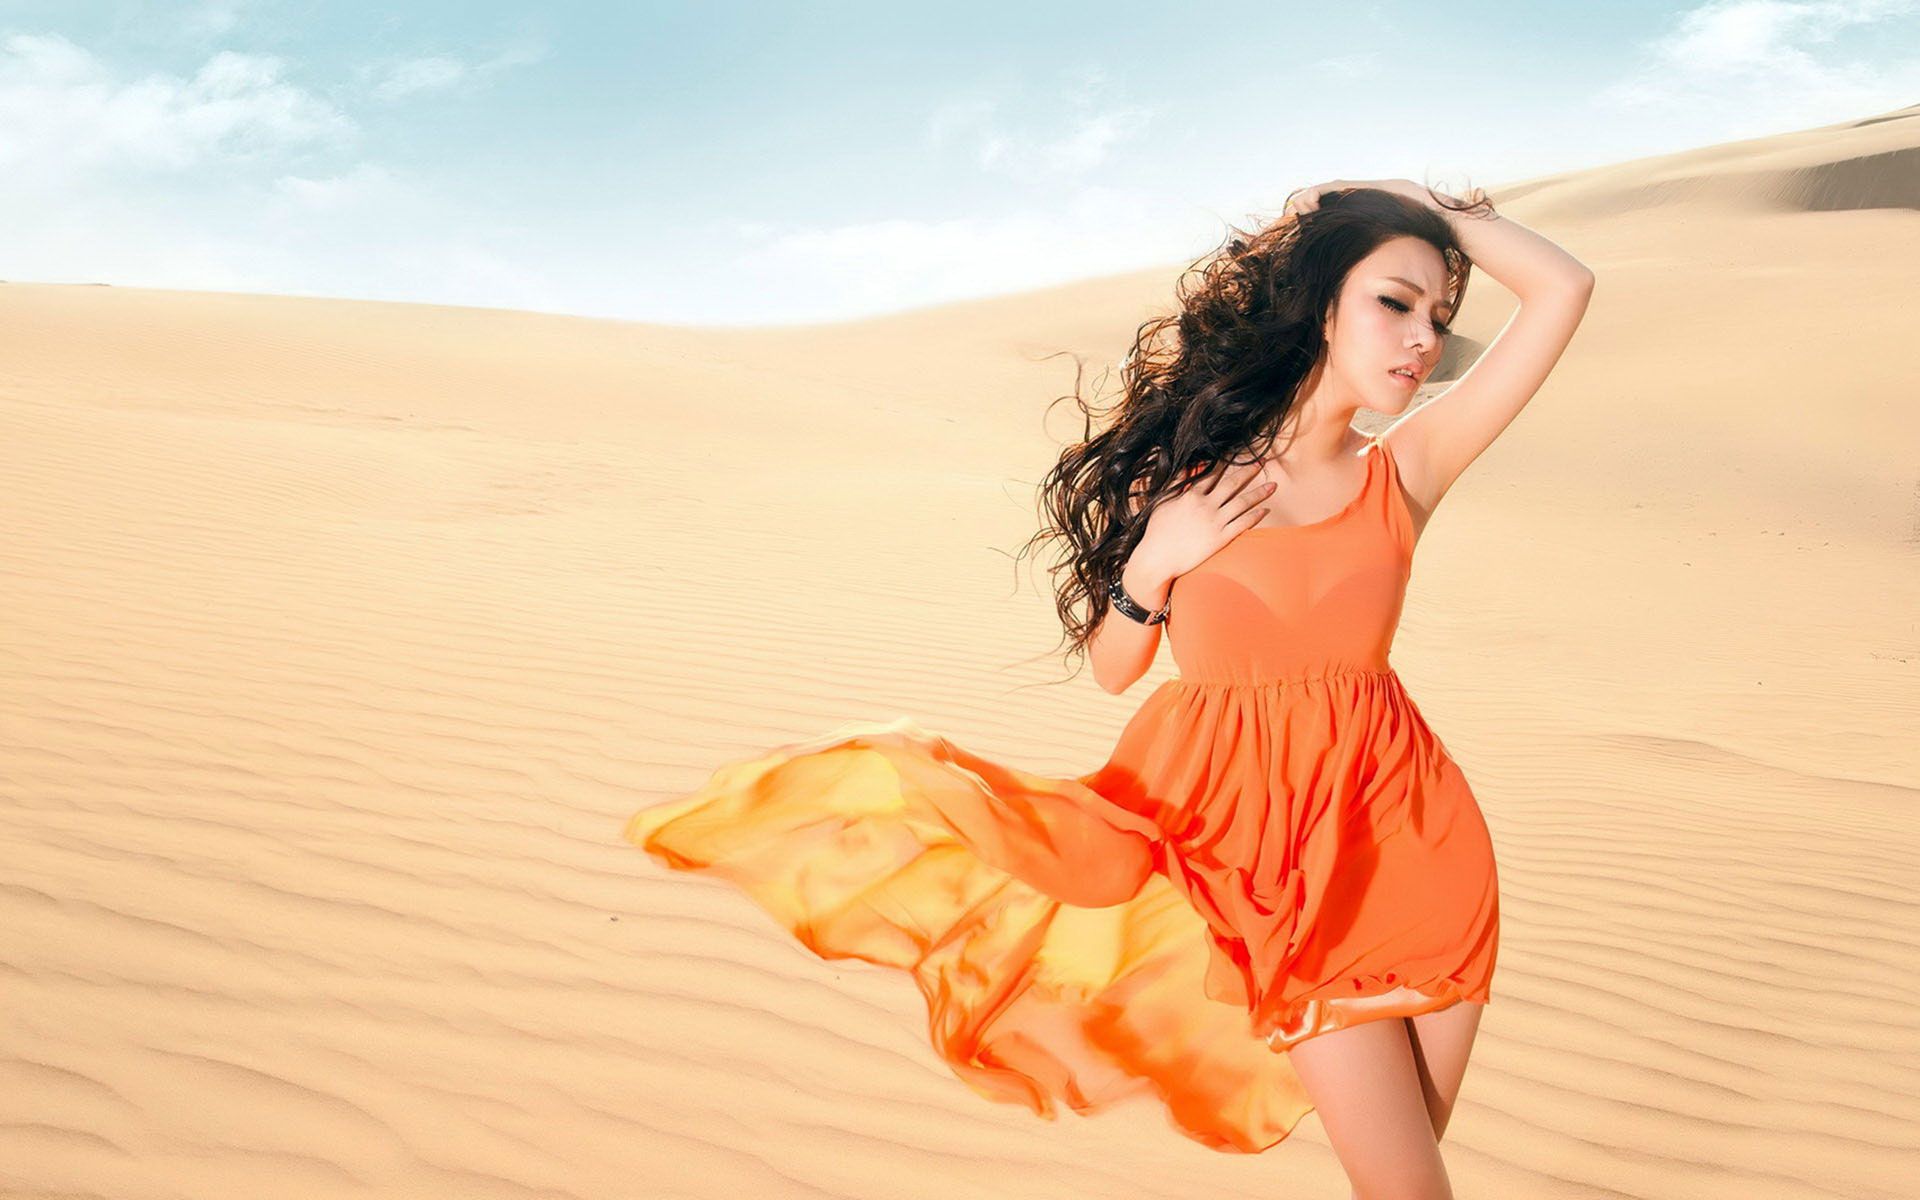 Girl in Orange Dress and Nice Pose, Dress is Flying and Dancing